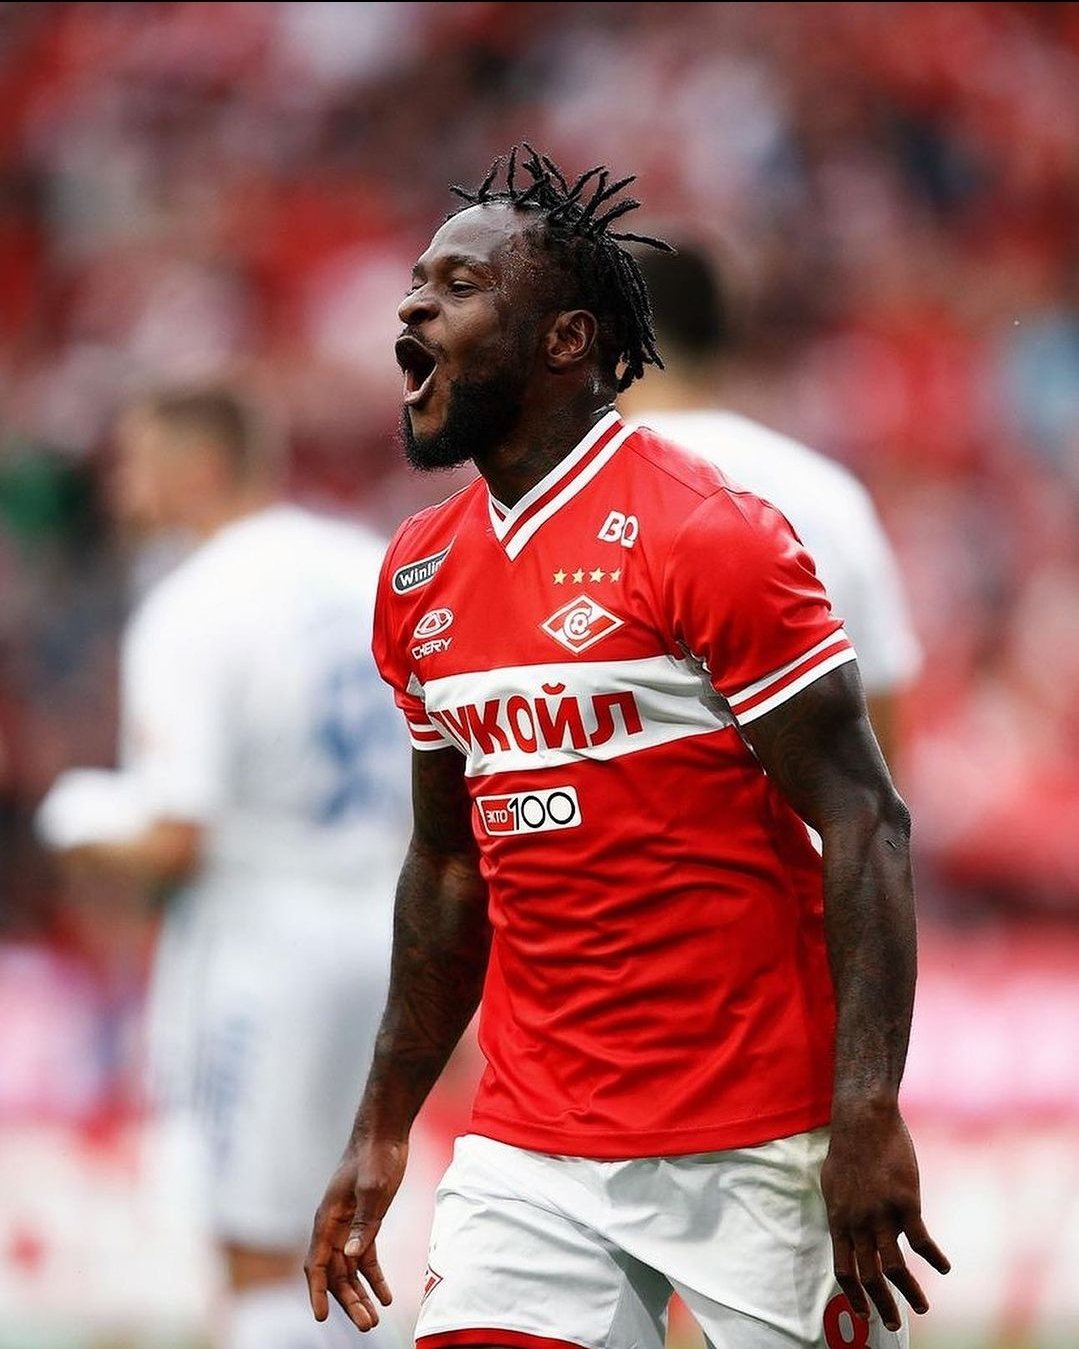 Victor Moses scored his first goal in the colours of Spartak